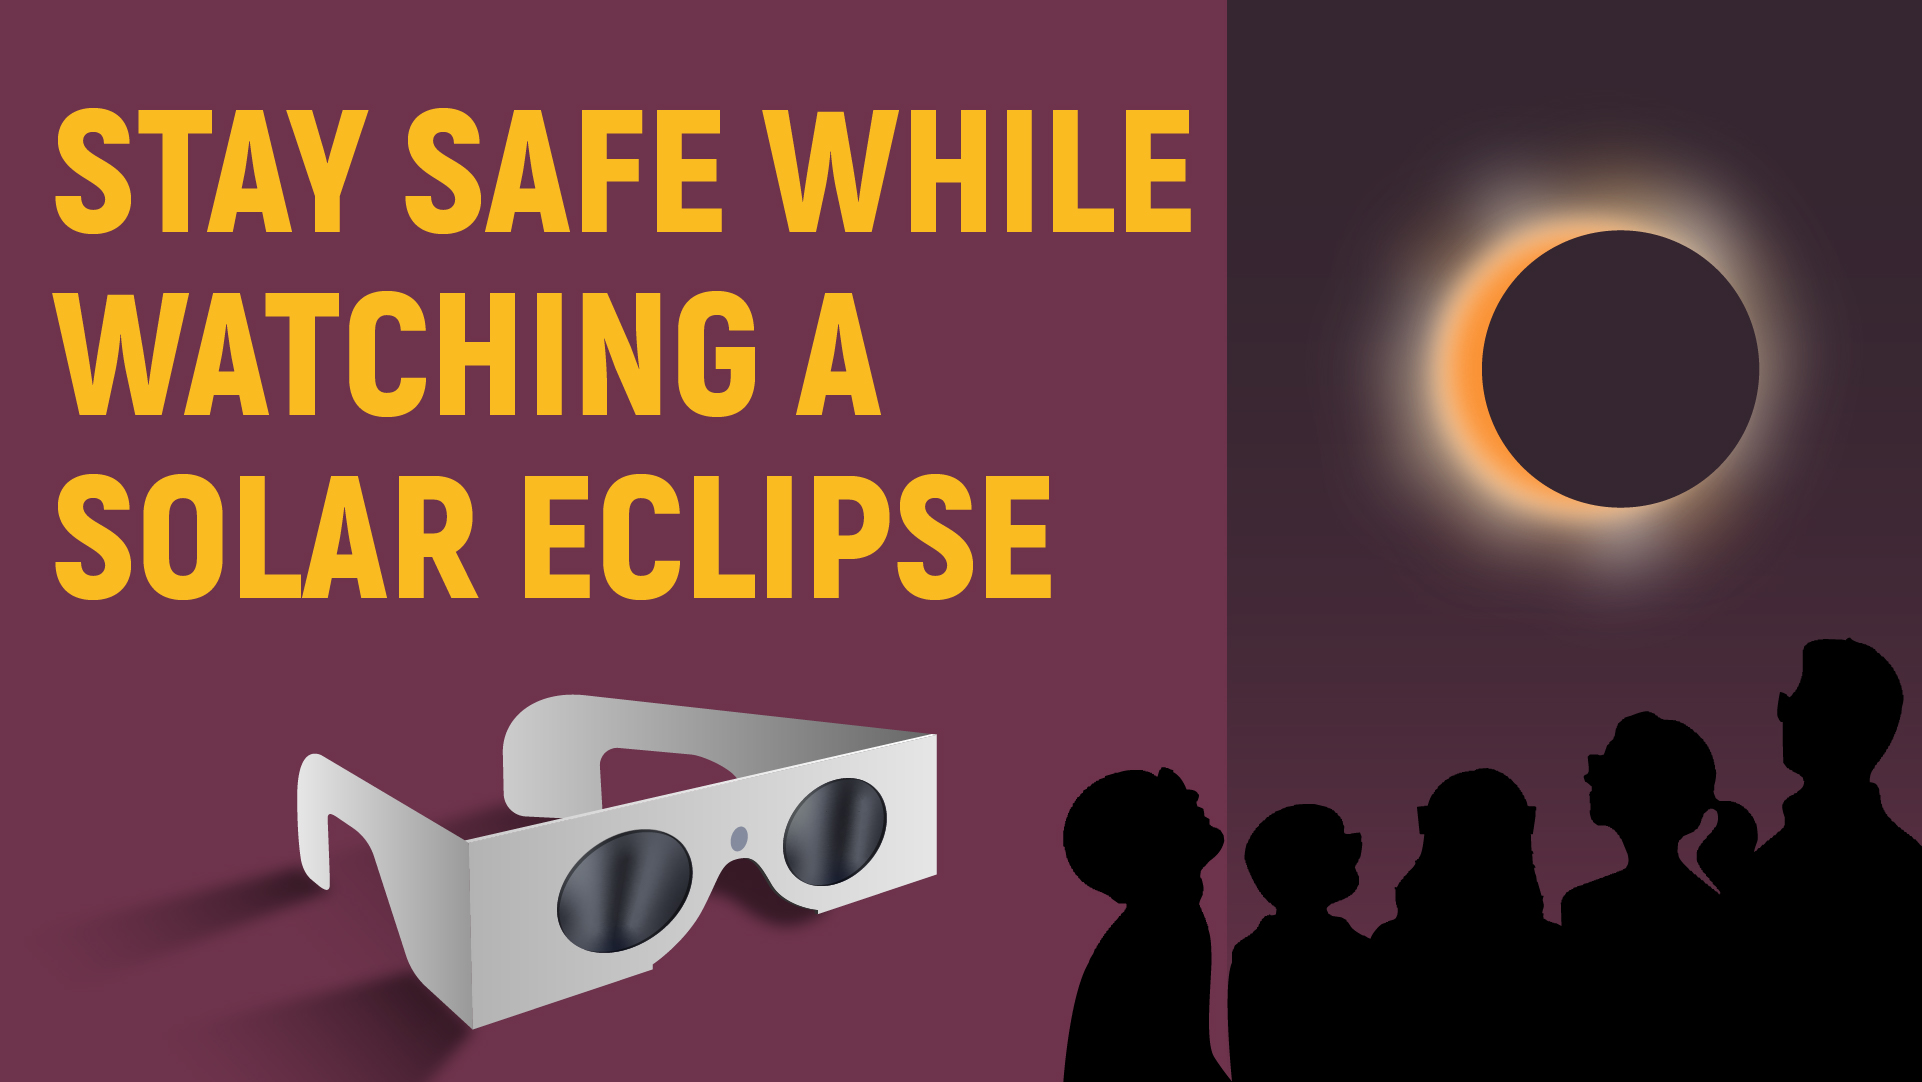 Everything you need to know about the upcoming solar eclipse in April